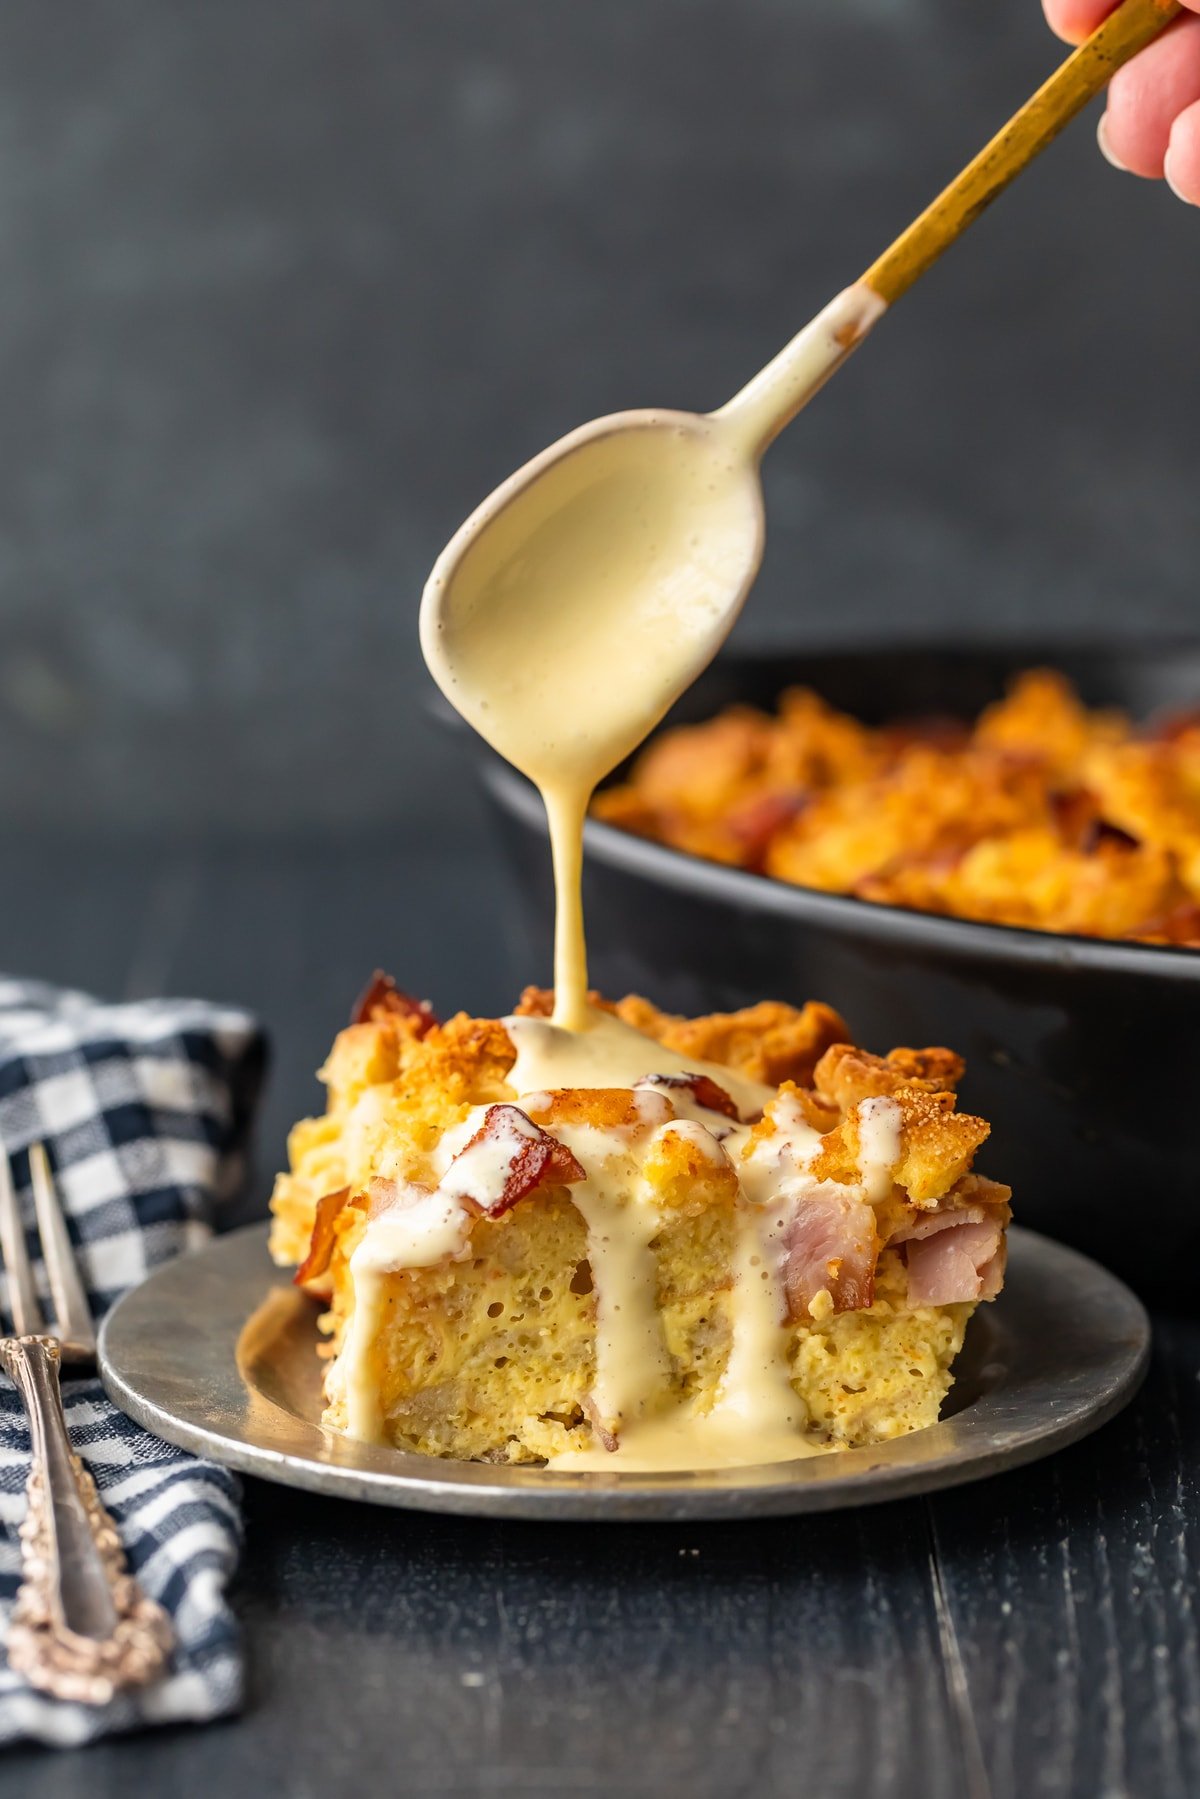 drizzling sauce over eggs benedict casserole with a spoon